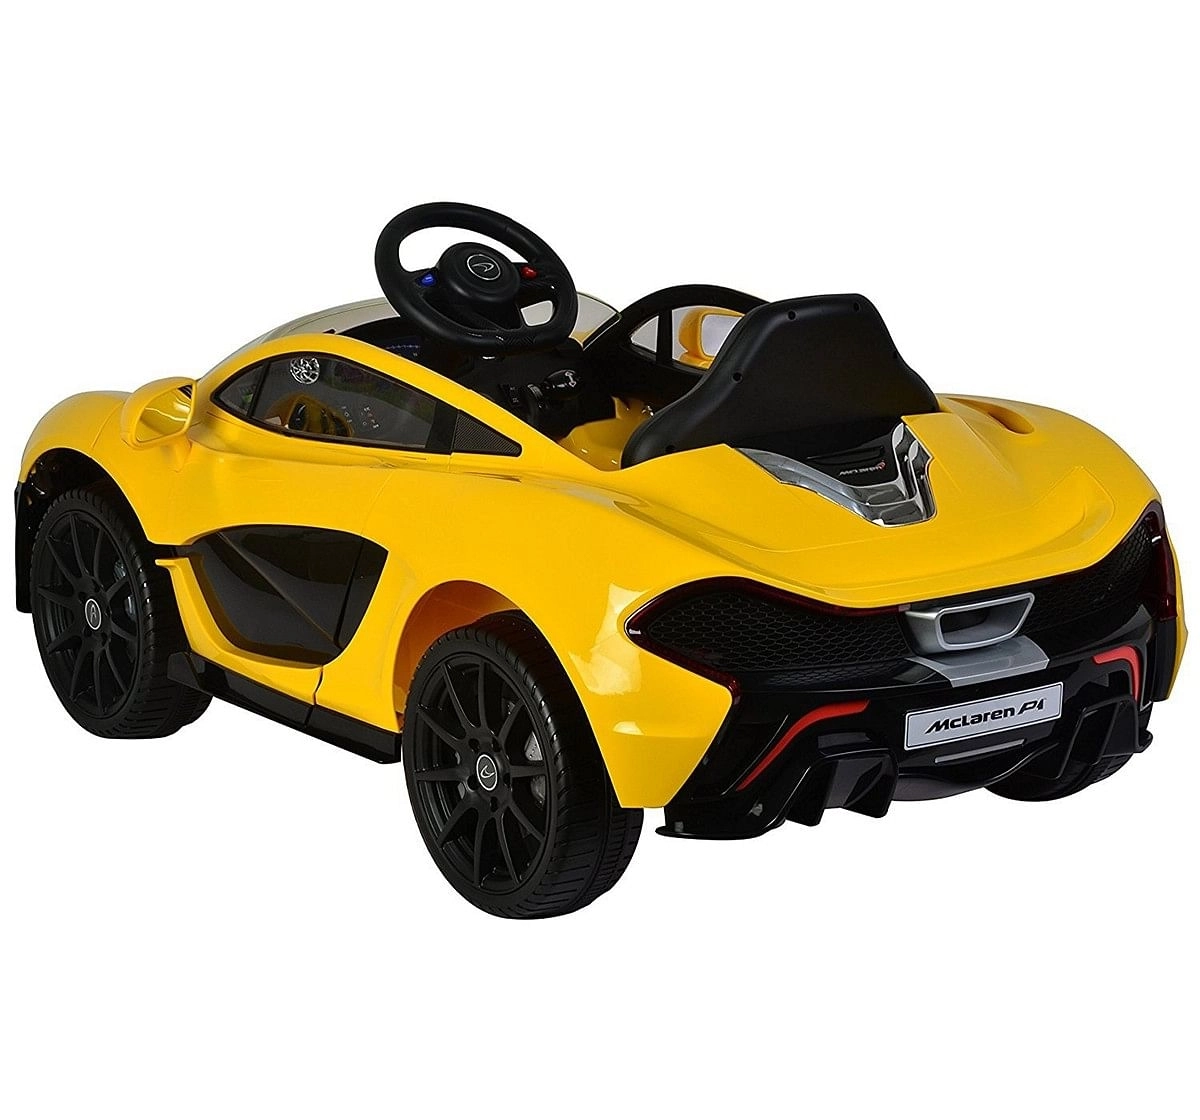 Chilokbo McLaren P1 Battery Operated Ride-on Car Yellow Battery Operated Rideons for Kids age 18M + (Yellow)